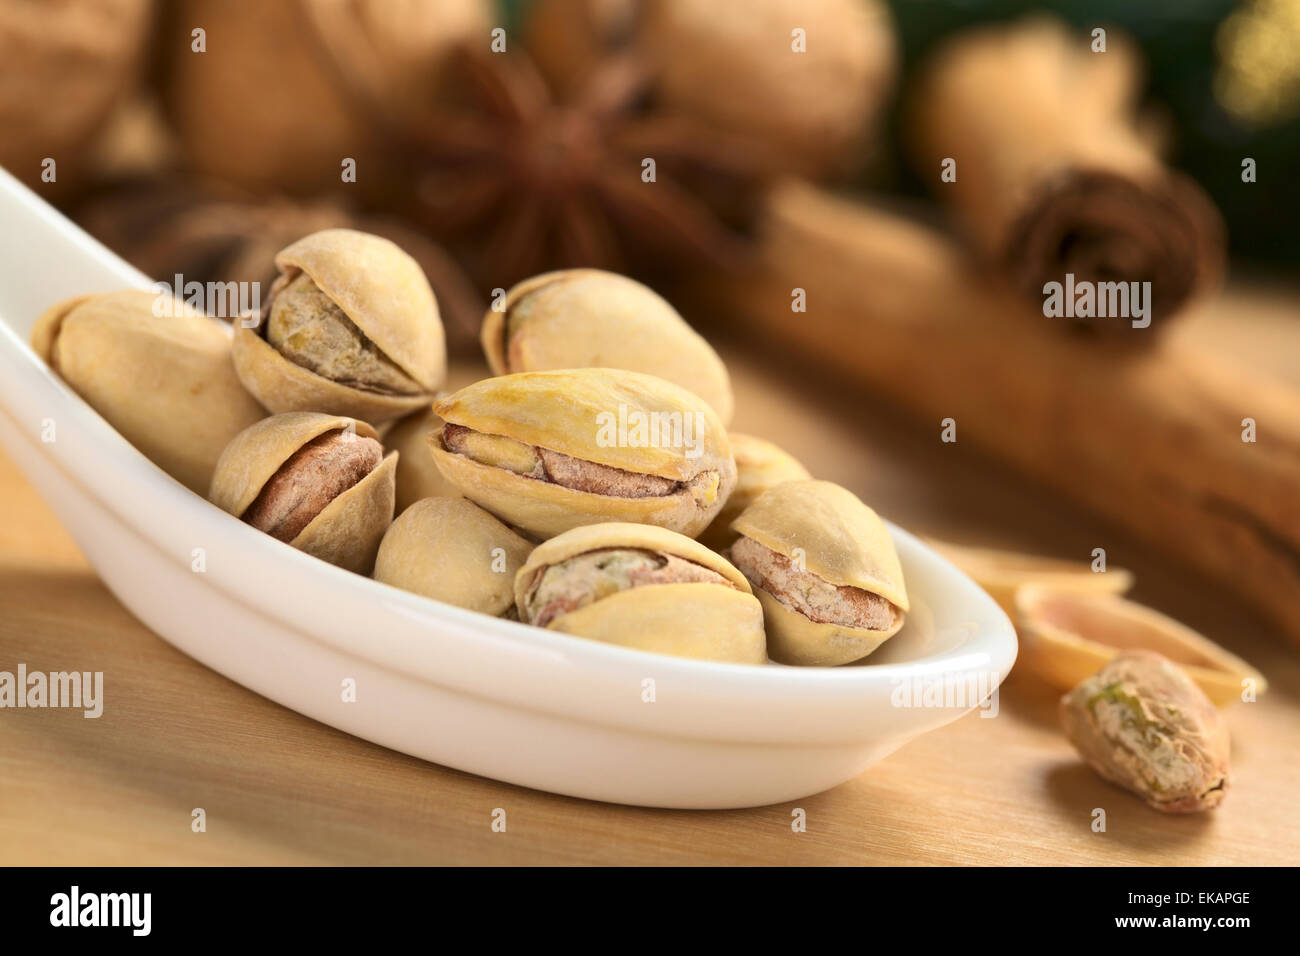 Roasted pistachio nuts with shell (Selective Focus, Focus on the front upper pistachio) Stock Photo